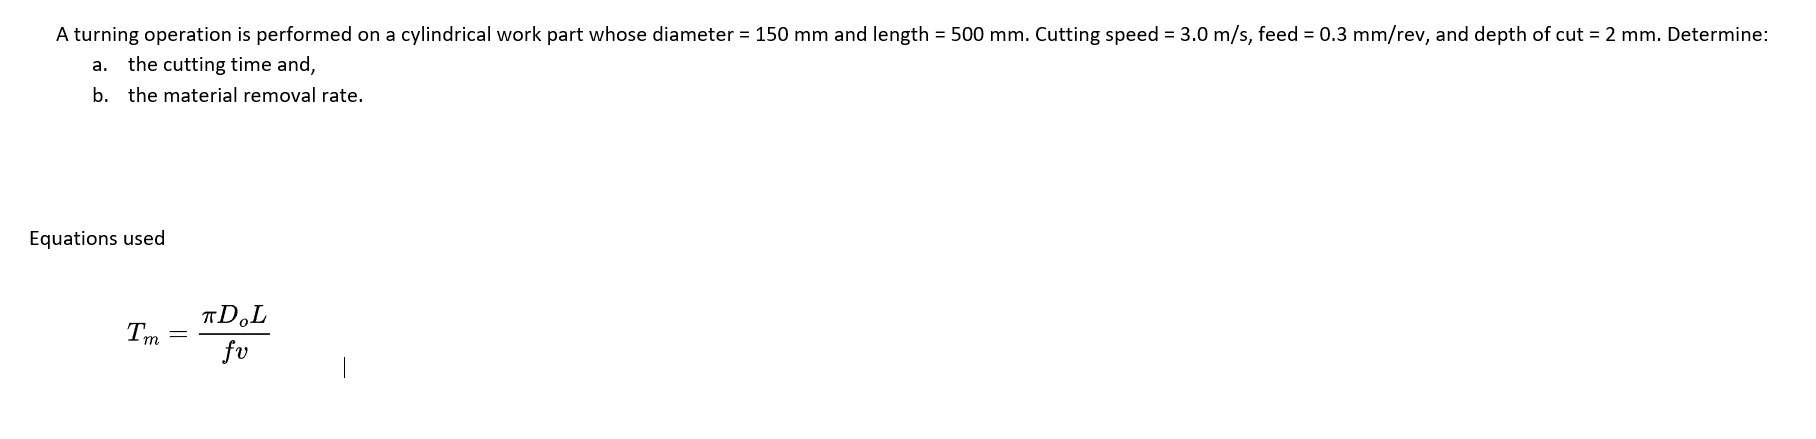 A turning operation is performed on a cylindrical work part whose diameter = 150 mm and length = 500 mm. Cutting speed = 3.0 m/s, feed = 0.3 mm/rev, and depth of cut = 2 mm. Determine:
a. the cutting time and,
b. the material removal rate.
Equations used
Tm=
TD.L
fv